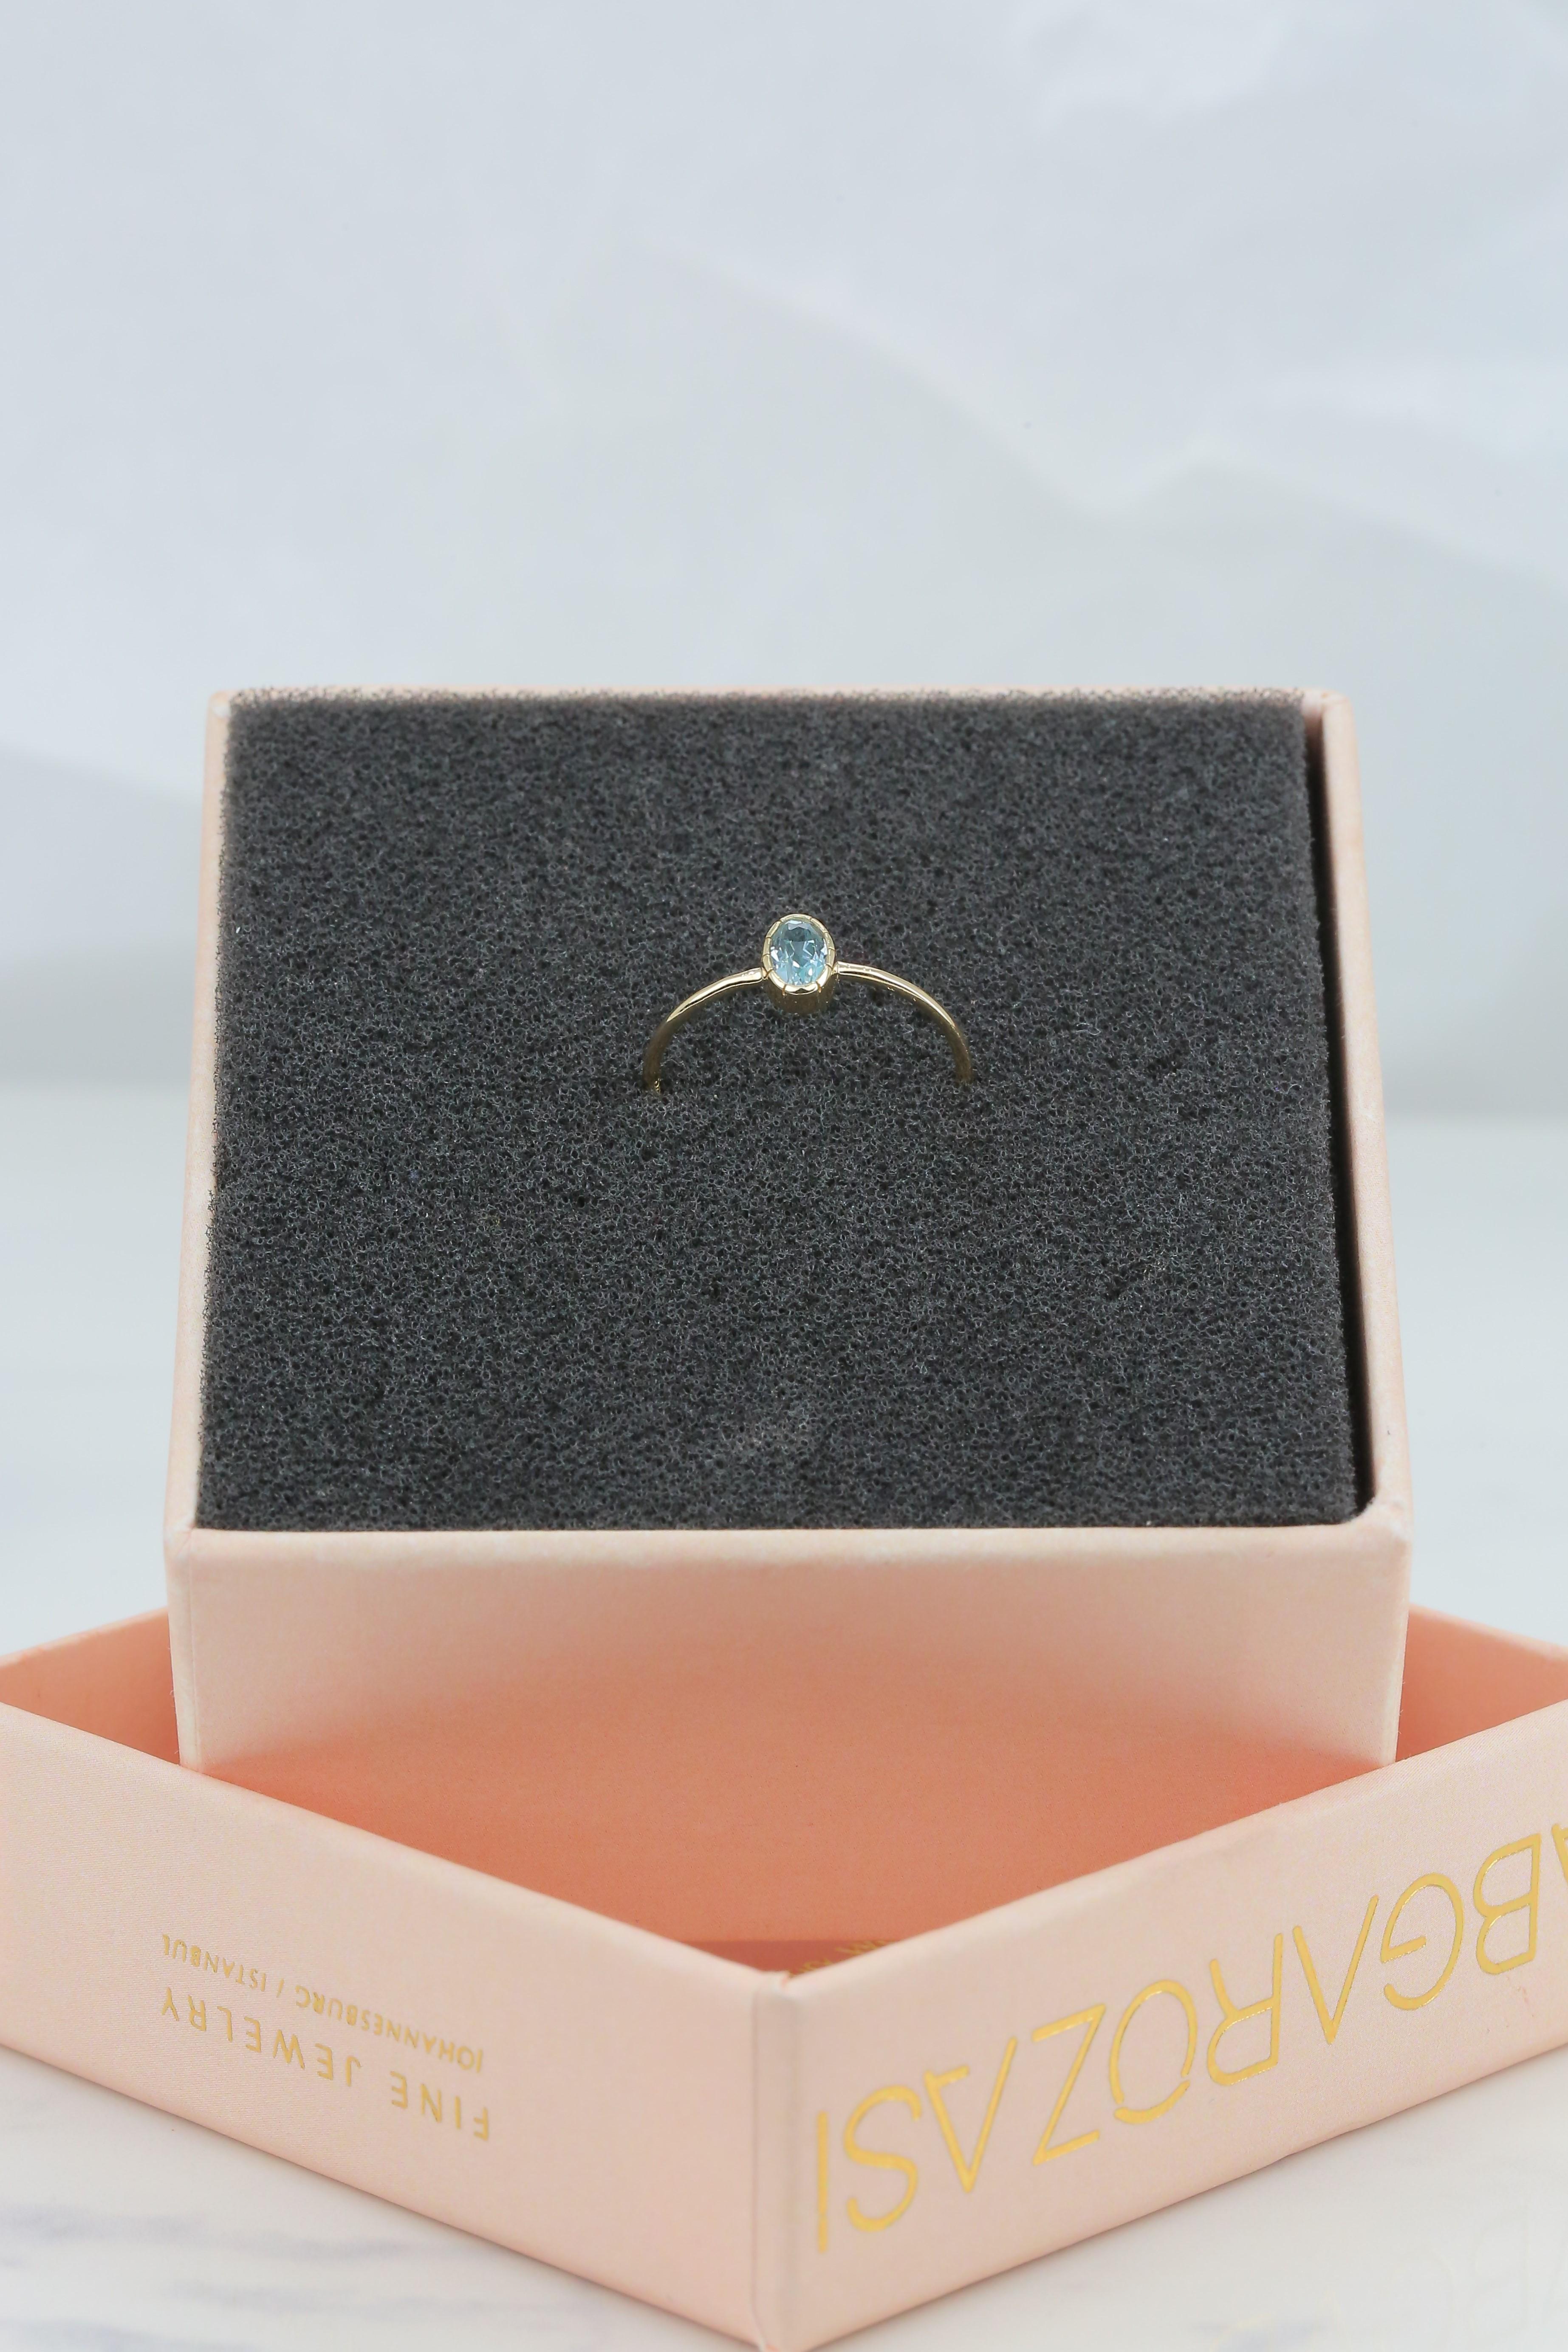 For Sale:  0.35 Ct Oval Cut Sky Topaz 14K Gold Birthstone Ring 5